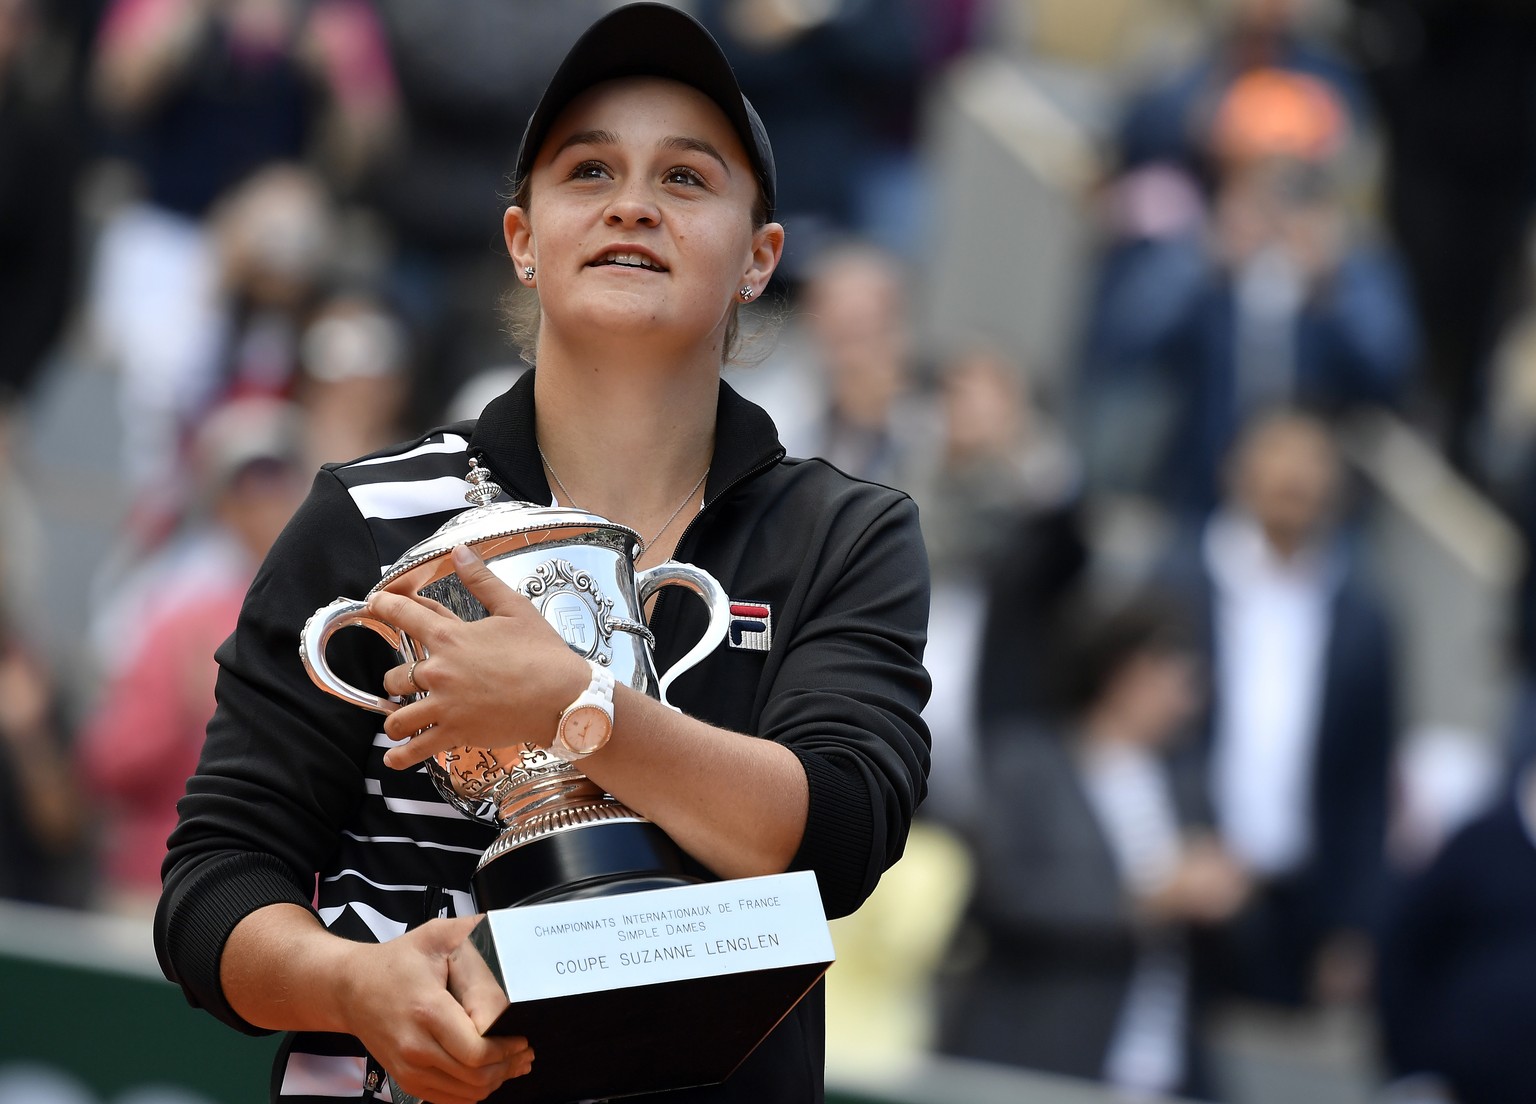 epa07635321 Ashleigh Barty of Australia poses with the trophy after winning the women’s final match against Marketa Vondrousova of the Czech Republic during the French Open tennis tournament at Roland ...